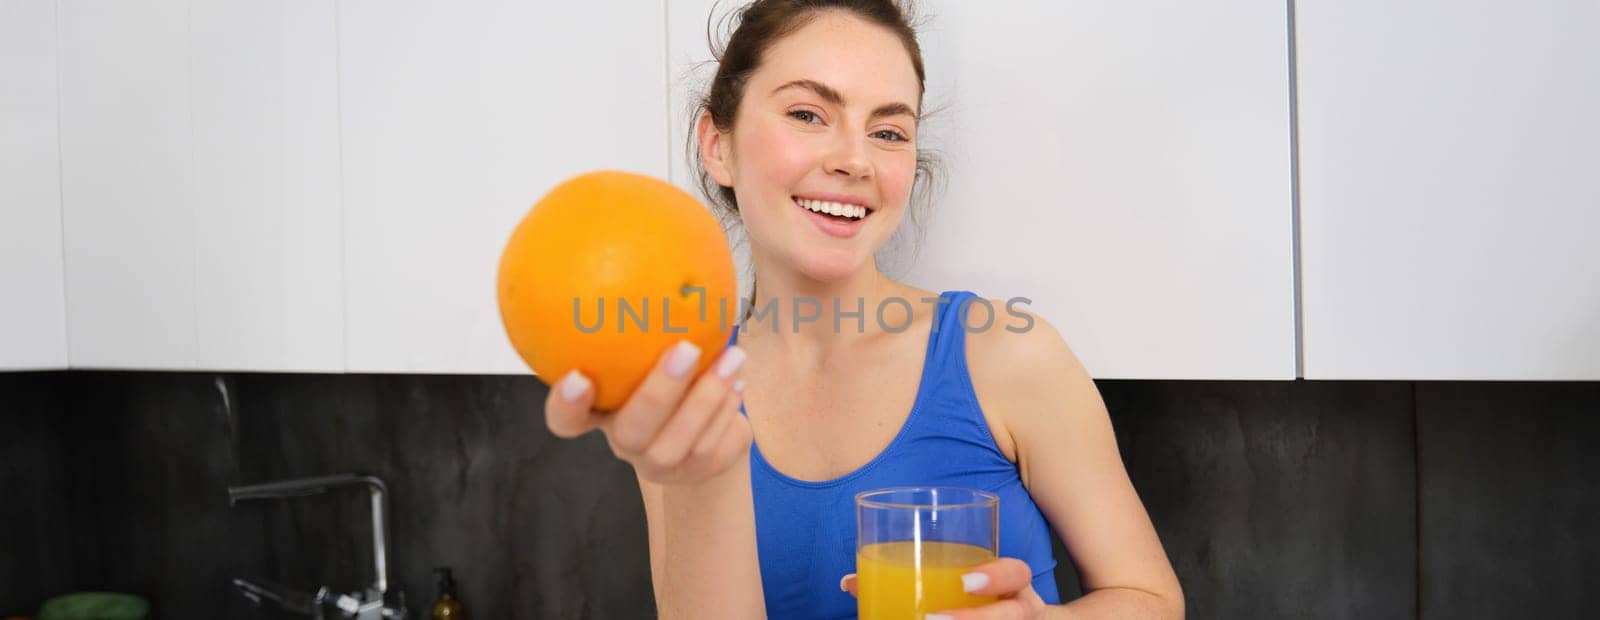 Close up portrait of sportswoman, fitness girl holding glass of fresh juice and an orange in hands, smiling at camera, standing in kitchen. Workout and healthy lifestyle concept